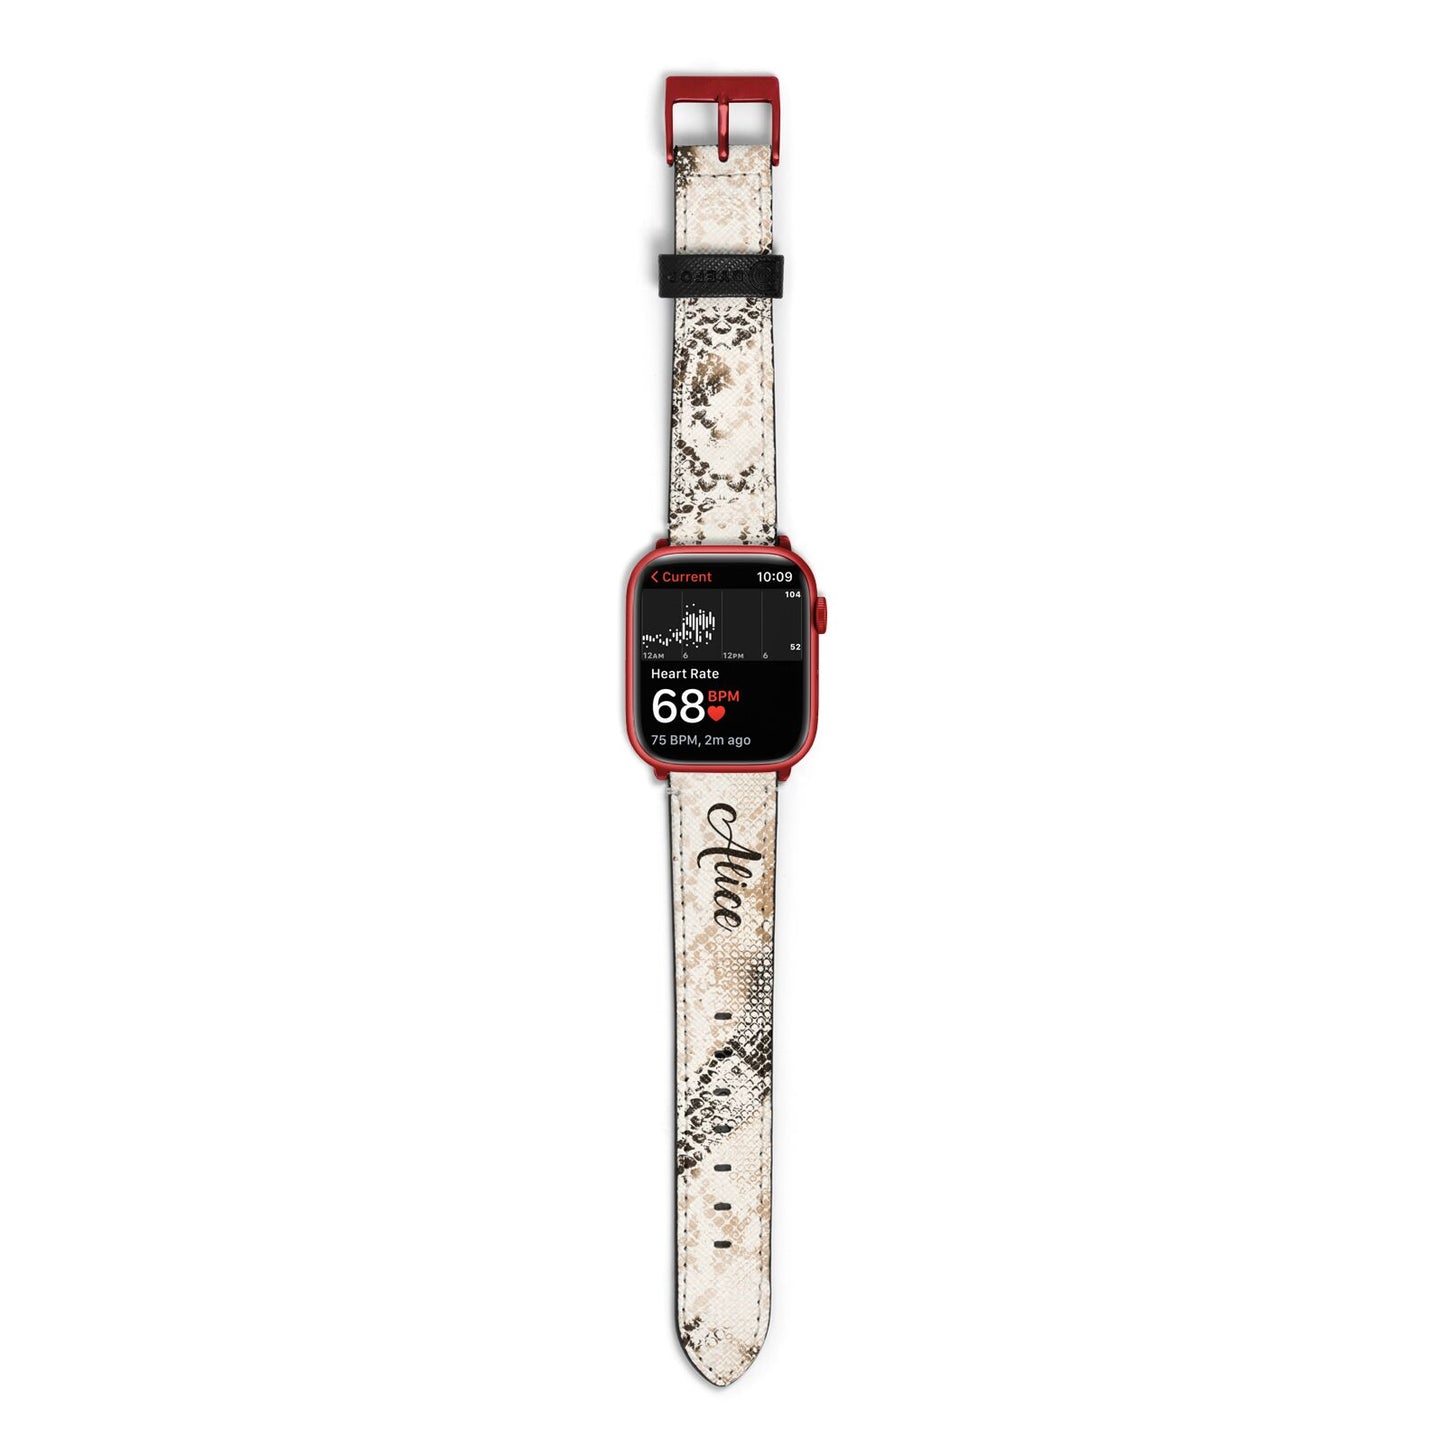 Custom Snakeskin Apple Watch Strap Size 38mm with Red Hardware